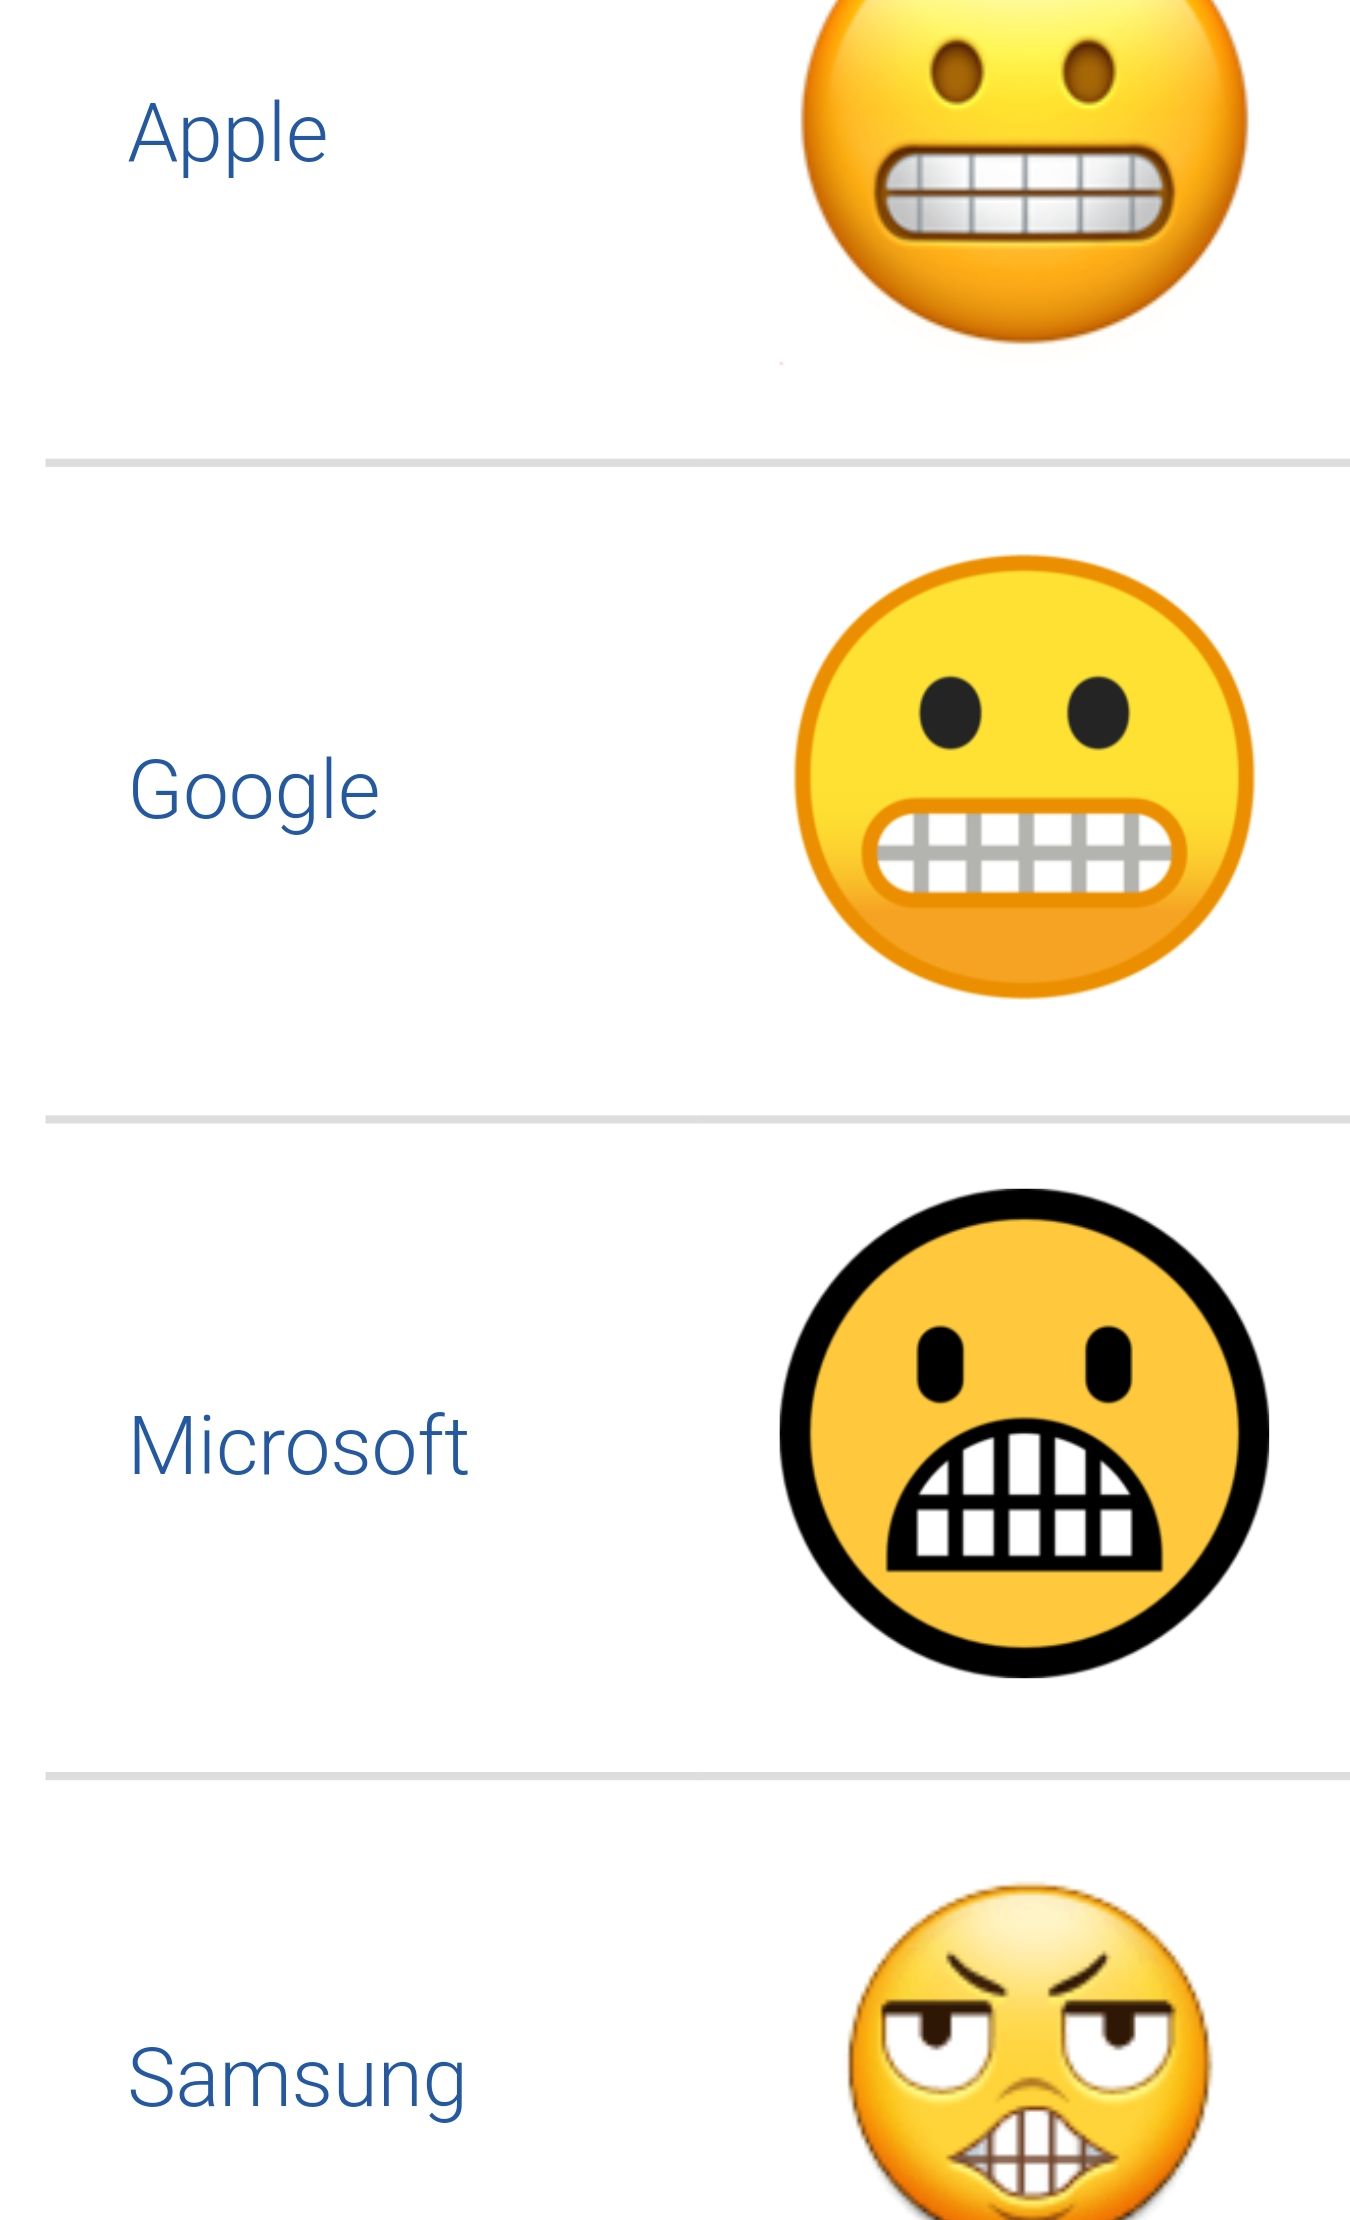 You really nailed a grimace, Samsung.